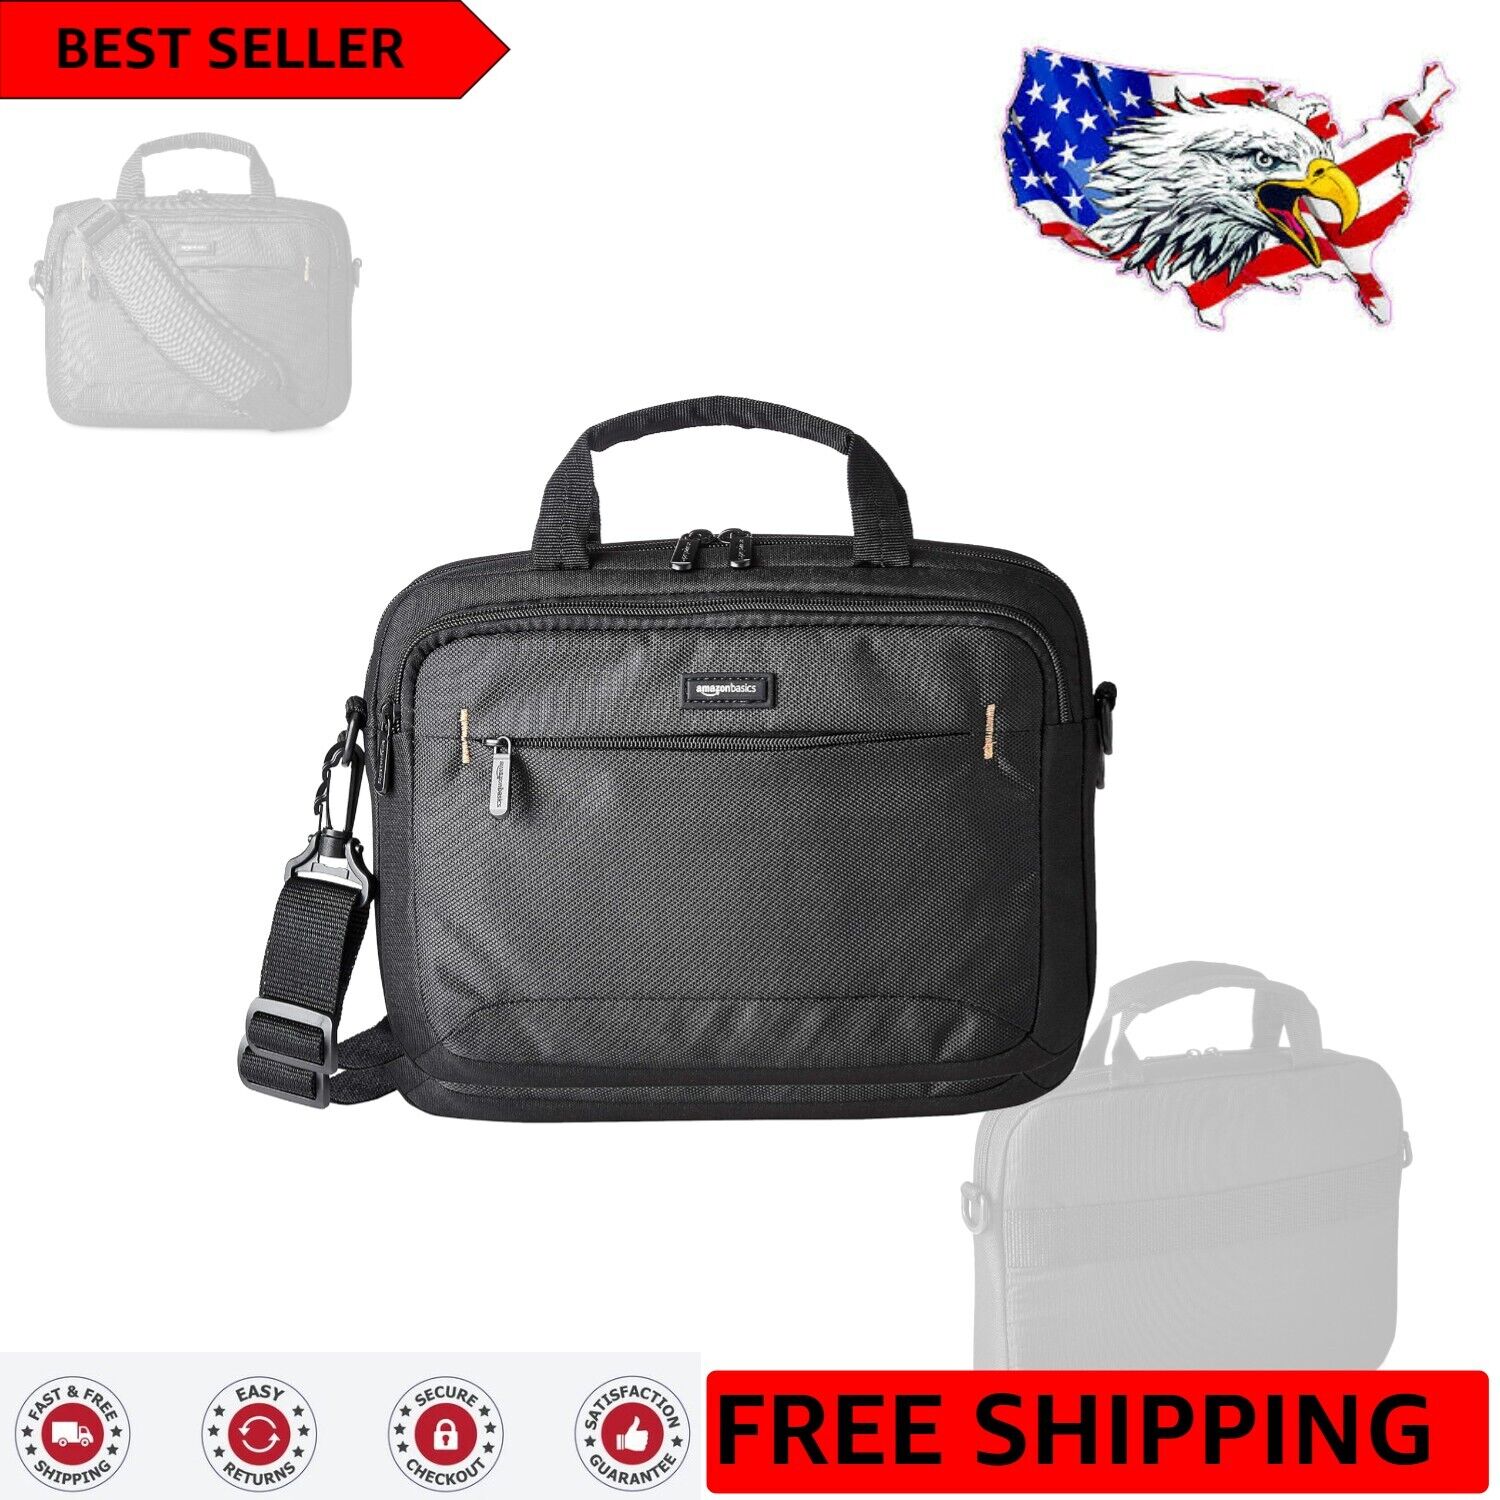 Basics 11.6-Inch Laptop Bag and Wireless Mouse Set for On-the-Go Professionals